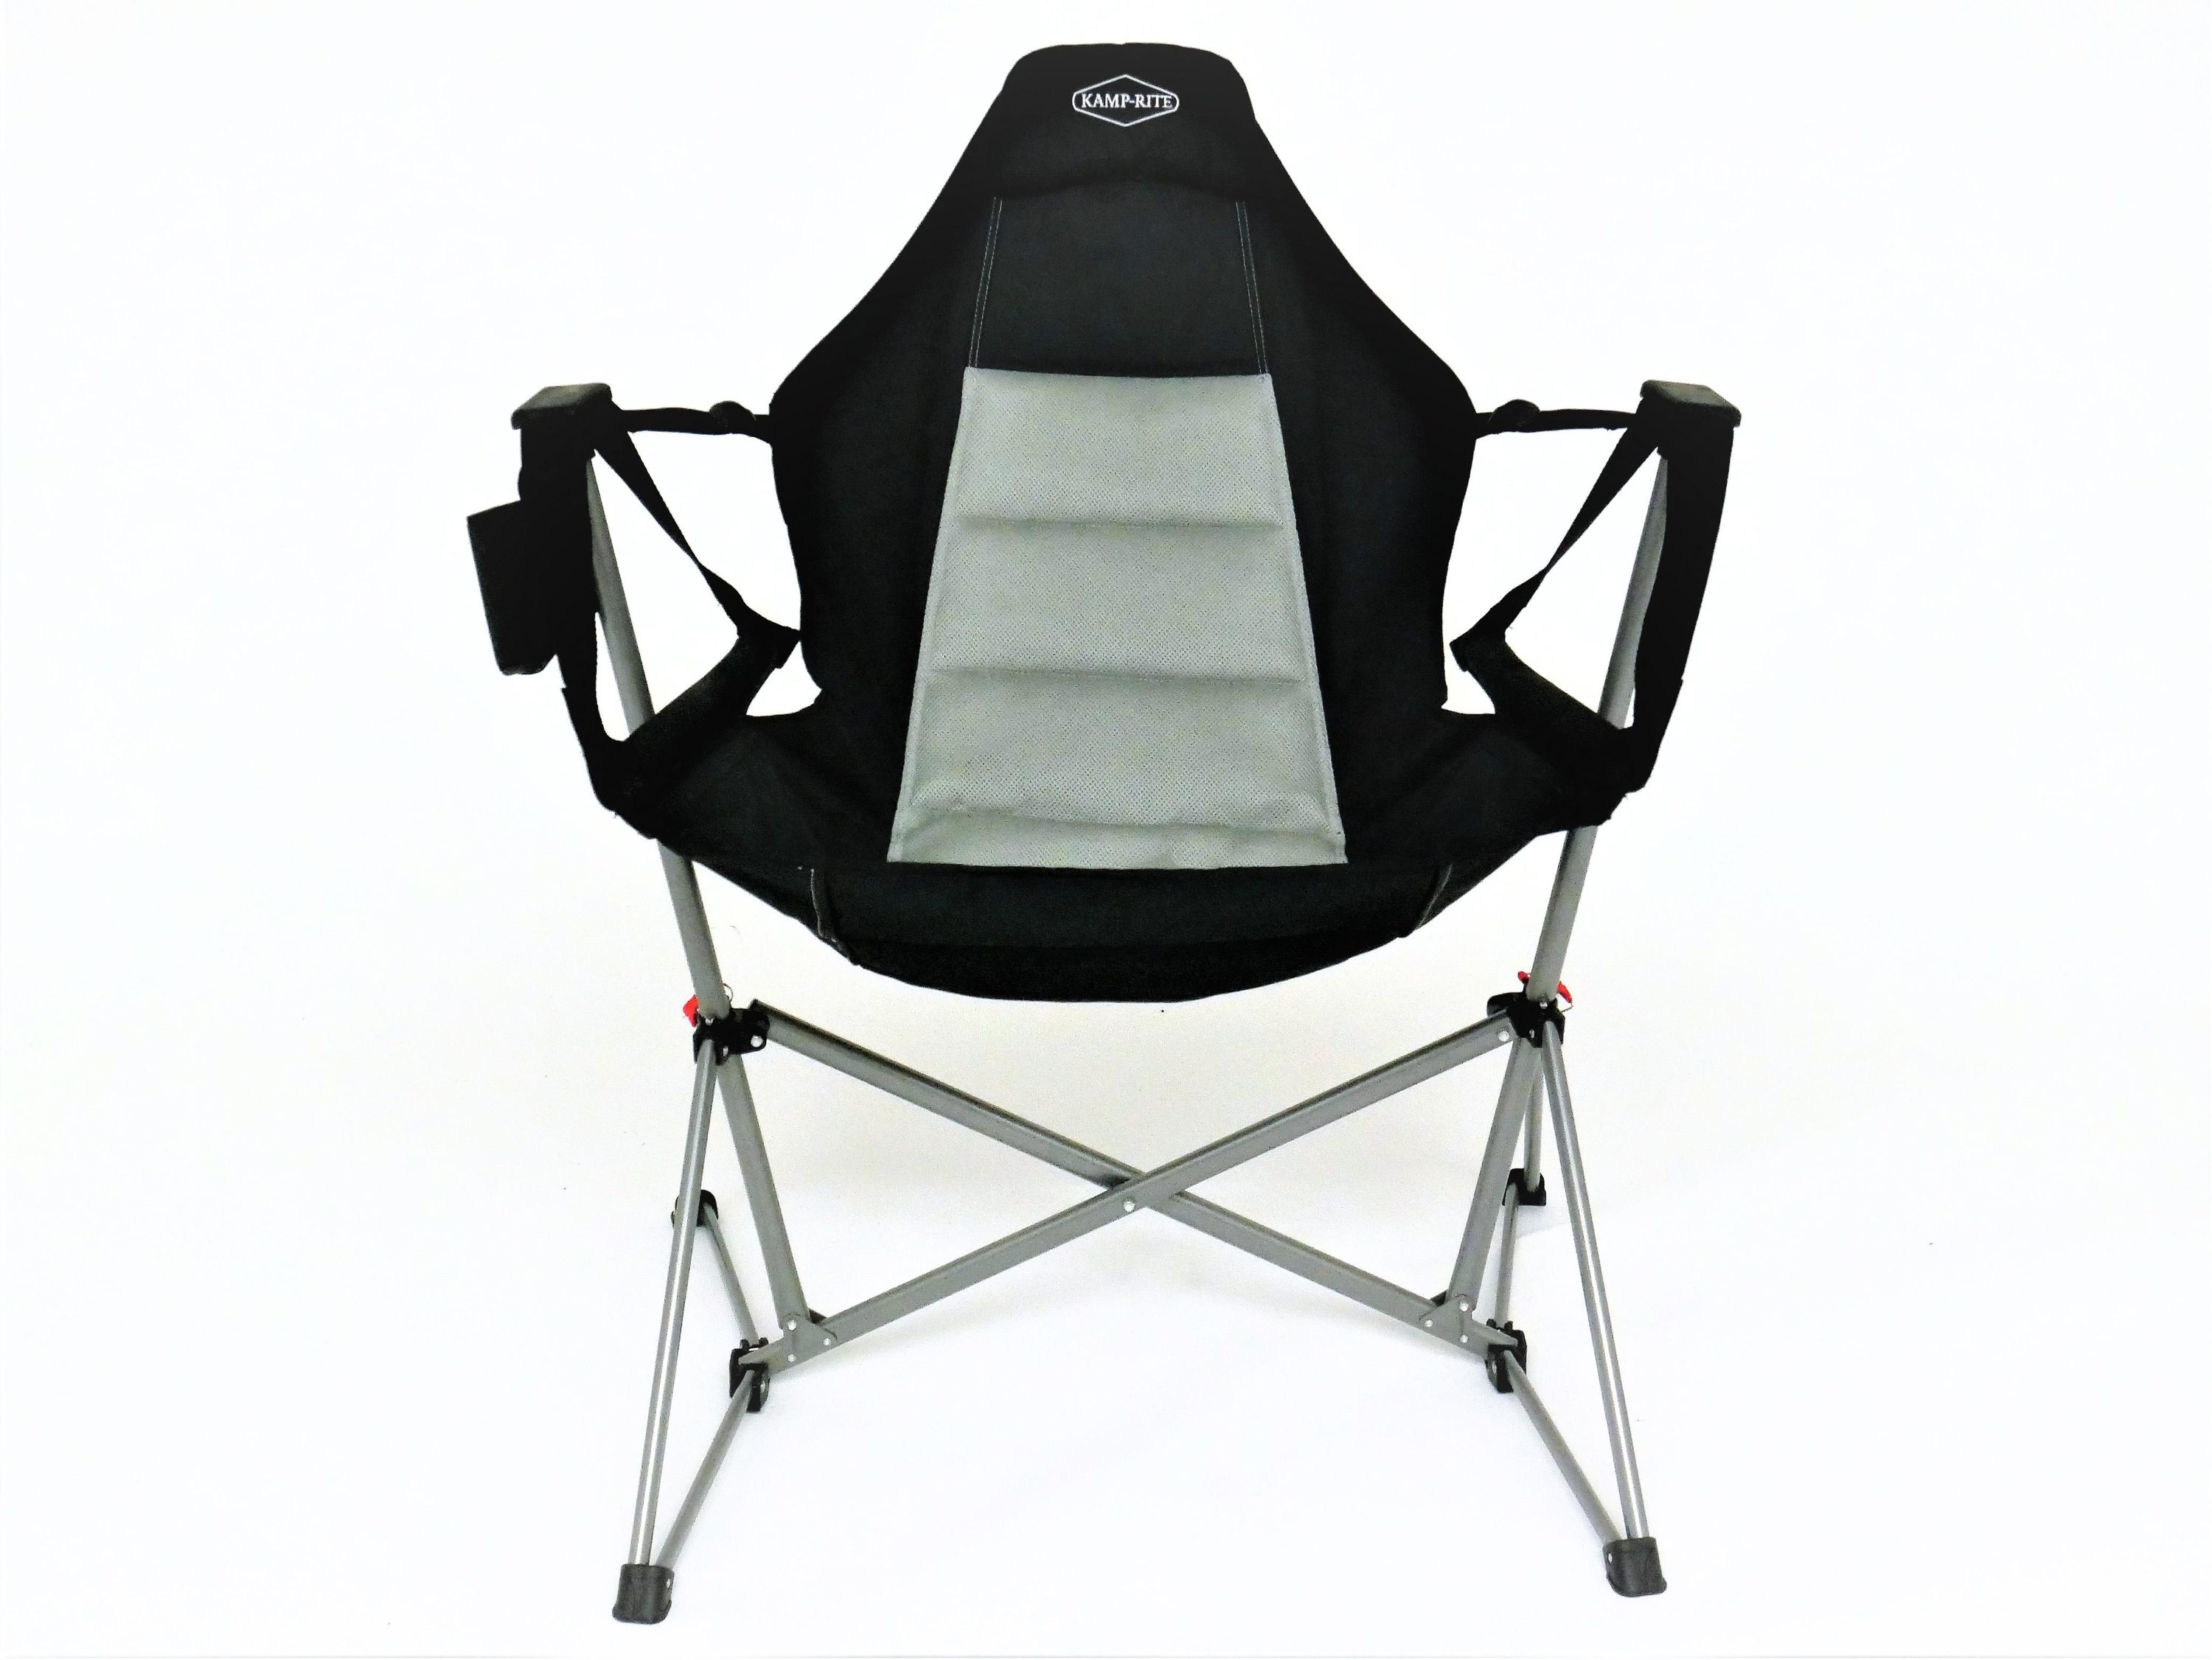 Folding Fishing Chair Camping Swing Recliner Relaxation Comfort Chair Heavy Duty 